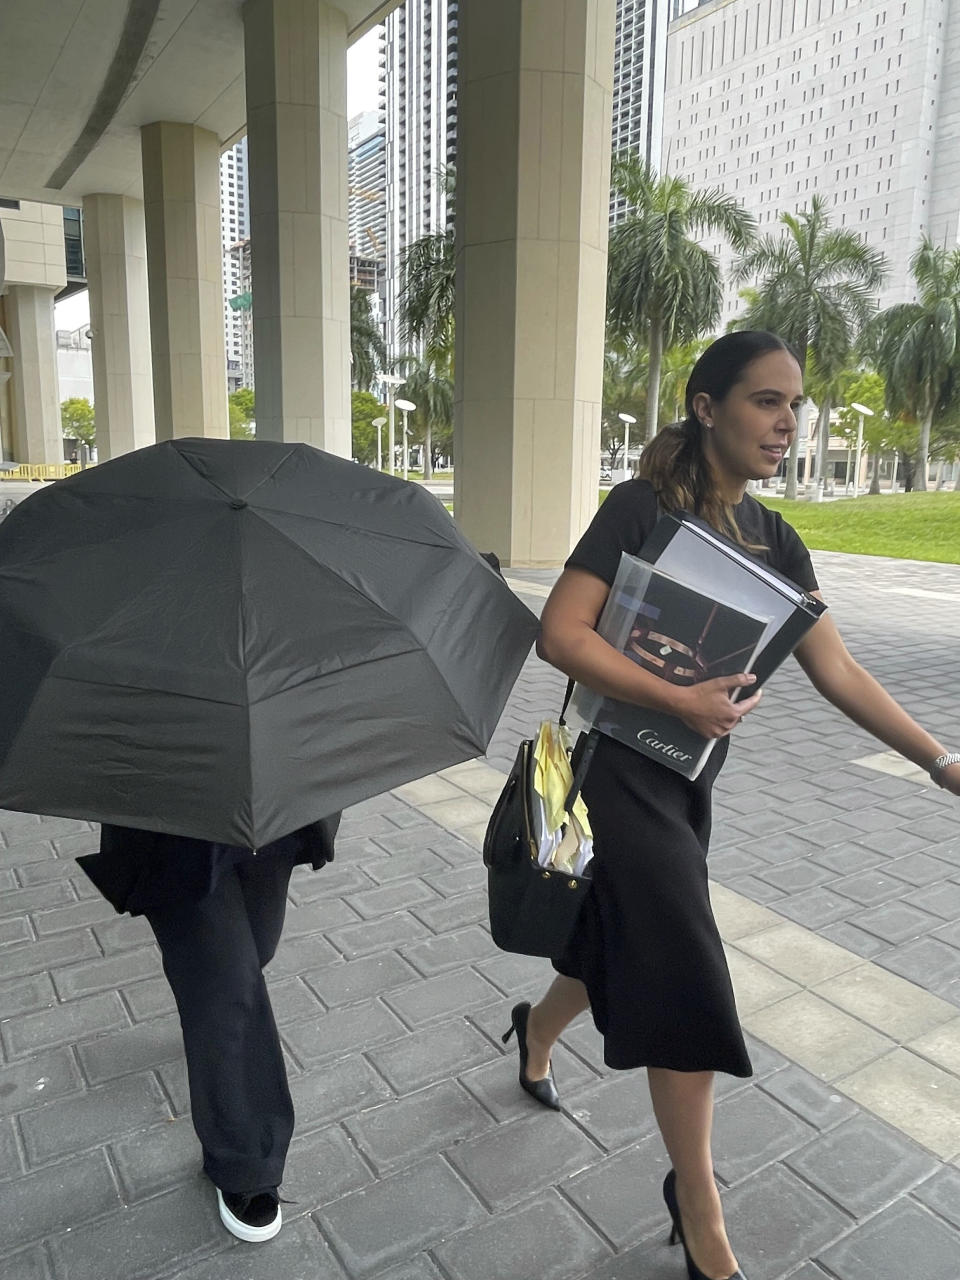 Celebrity handbag designer Nancy Gonzalez hides under an umbrella as she walks with her lawyer Andrea Lopez outside the federal courthouse Monday, April 22, 2024, in Miami. The Colombian designer, whose bags were purchased by celebrities like Britney Spears and the cast of the "Sex and the City" TV series, was sentenced to 18 months in federal prison on Monday for leading a smuggling ring that illegally imported into the U.S. crocodile handbags for sale at high end showrooms using couriers on commercial flights. (AP Photo/Josh Goodman)